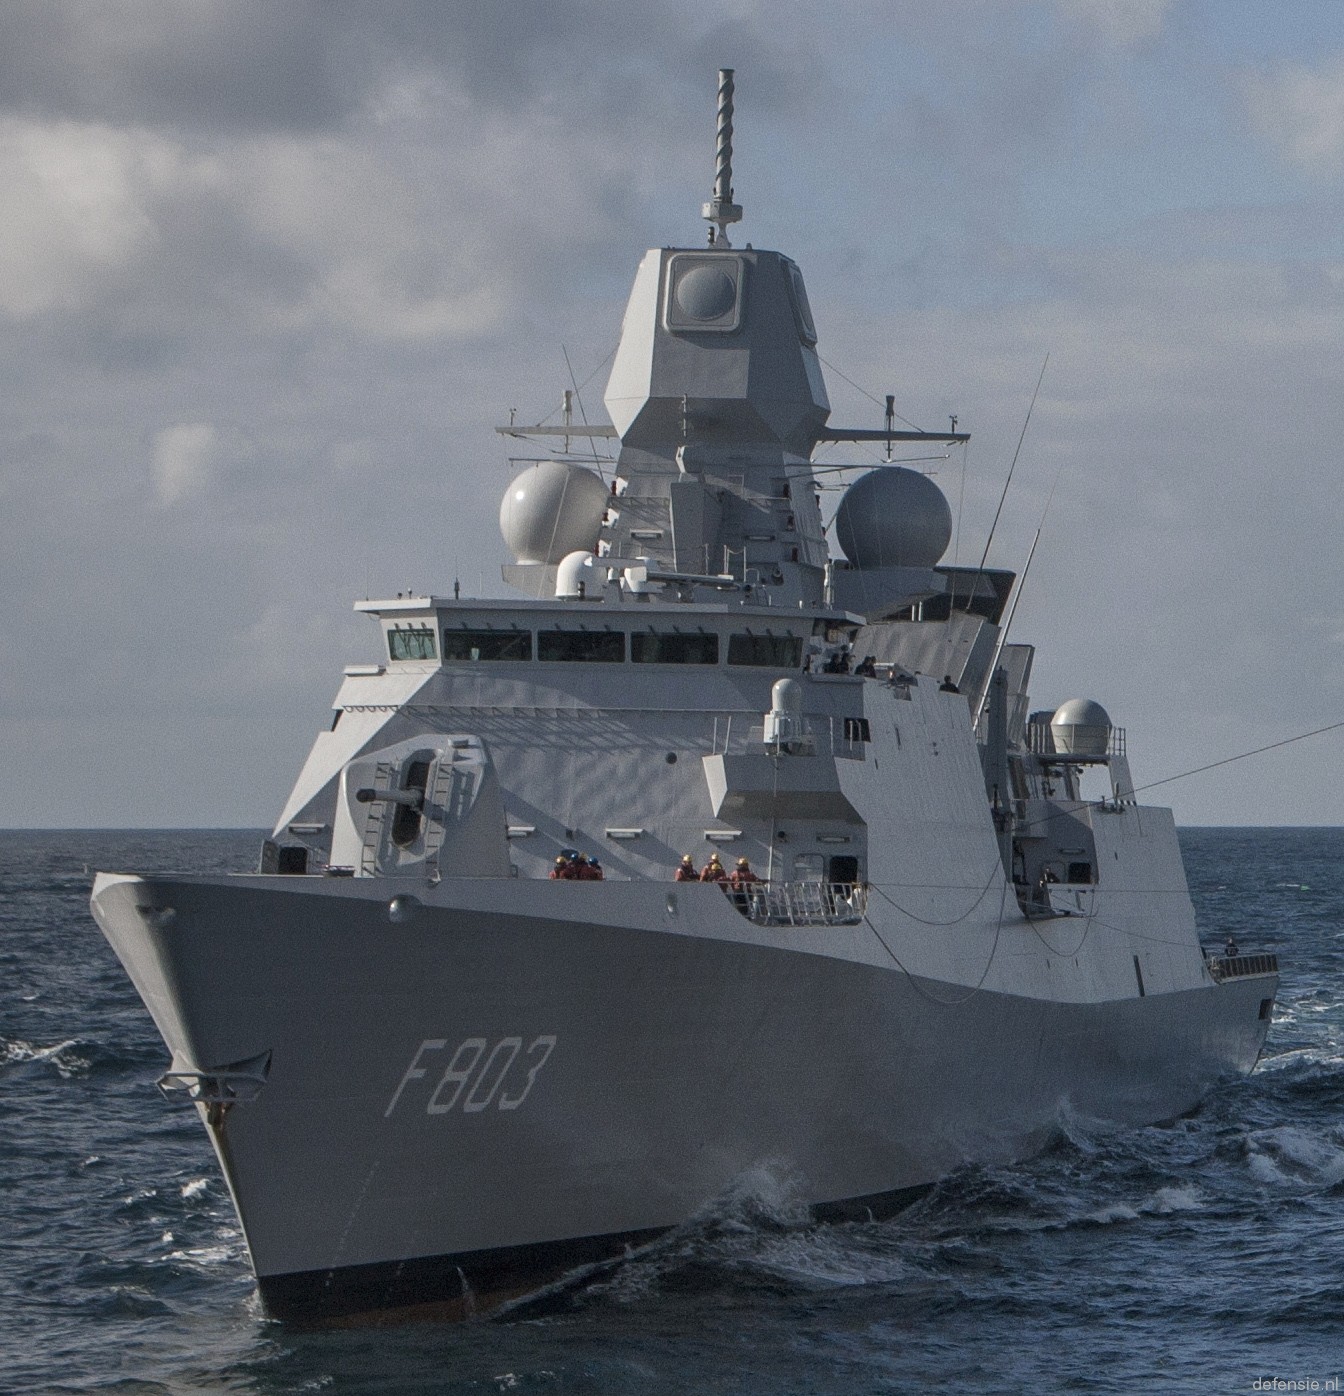 f-803 hnlms tromp guided missile frigate ffg air defense lcf royal netherlands navy 17